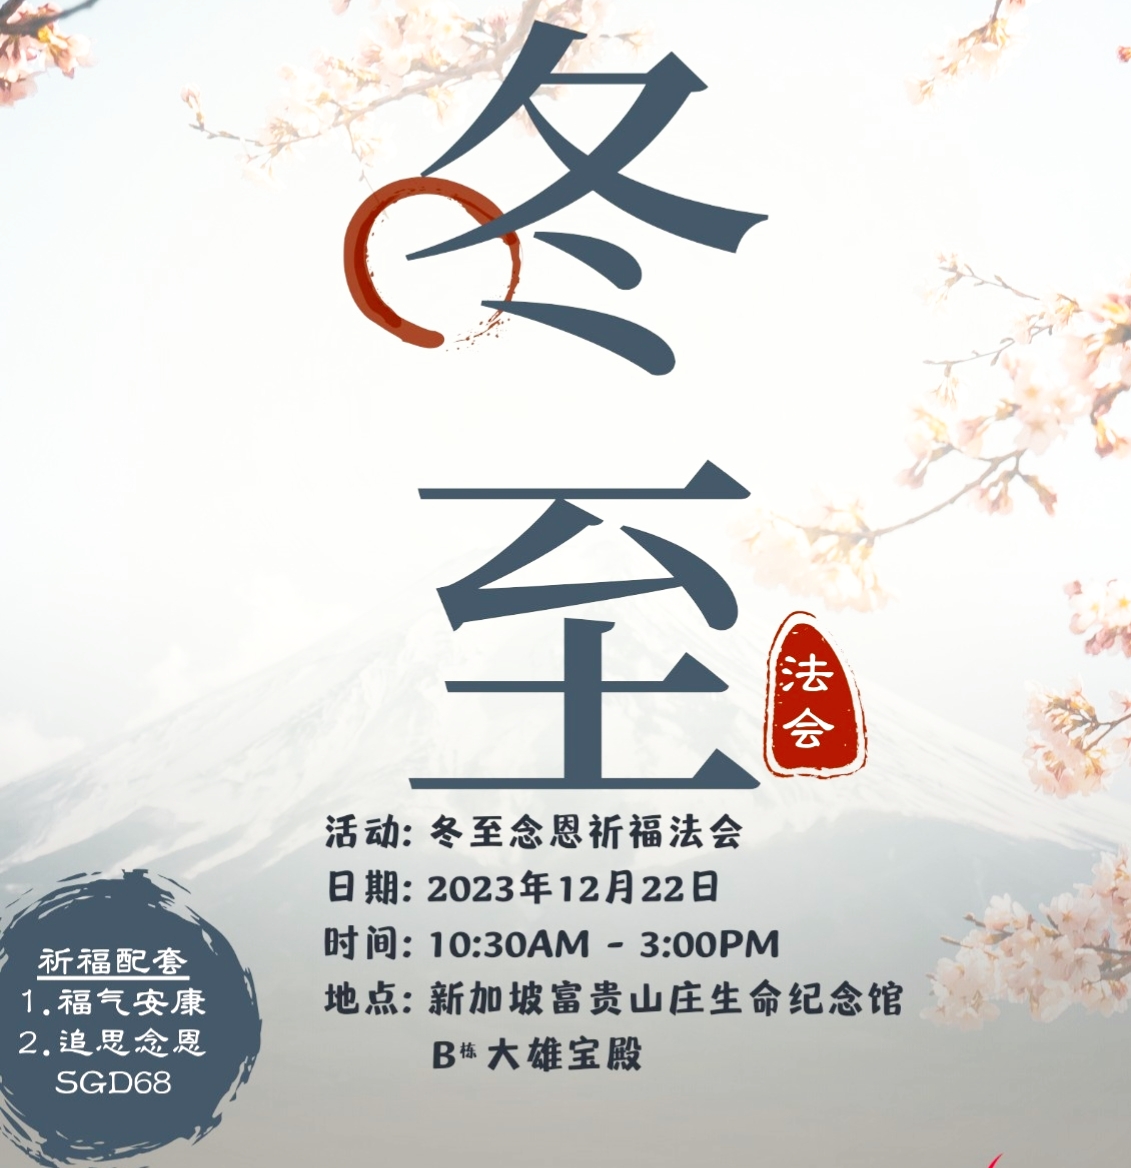 You are currently viewing Winter Solstice (Dong Zhi) 2023 Blessing Event